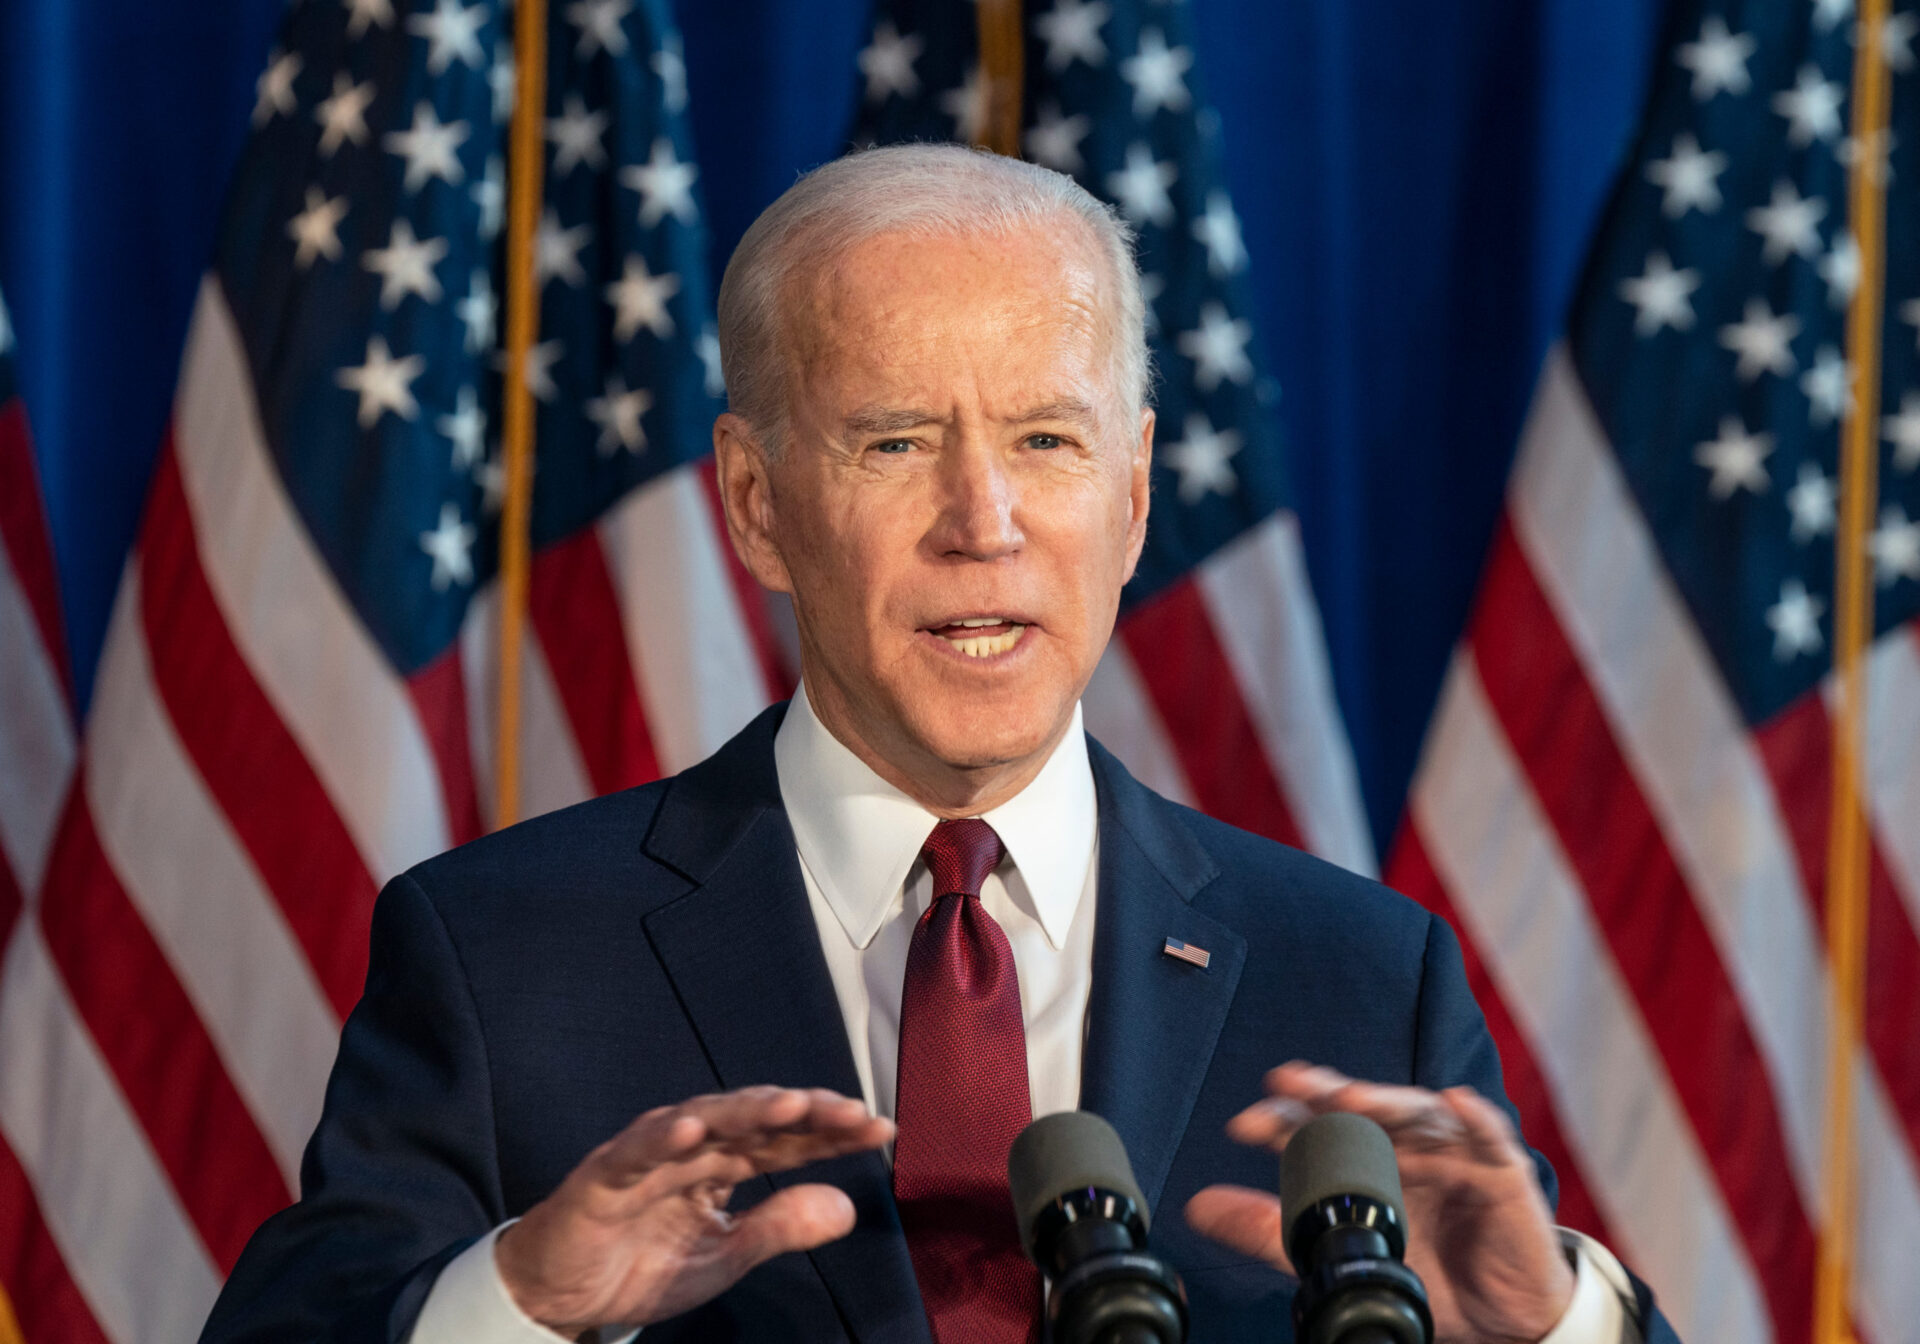 Washington Post: New Biden Eviction Ban ‘Almost Certainly Illegal’